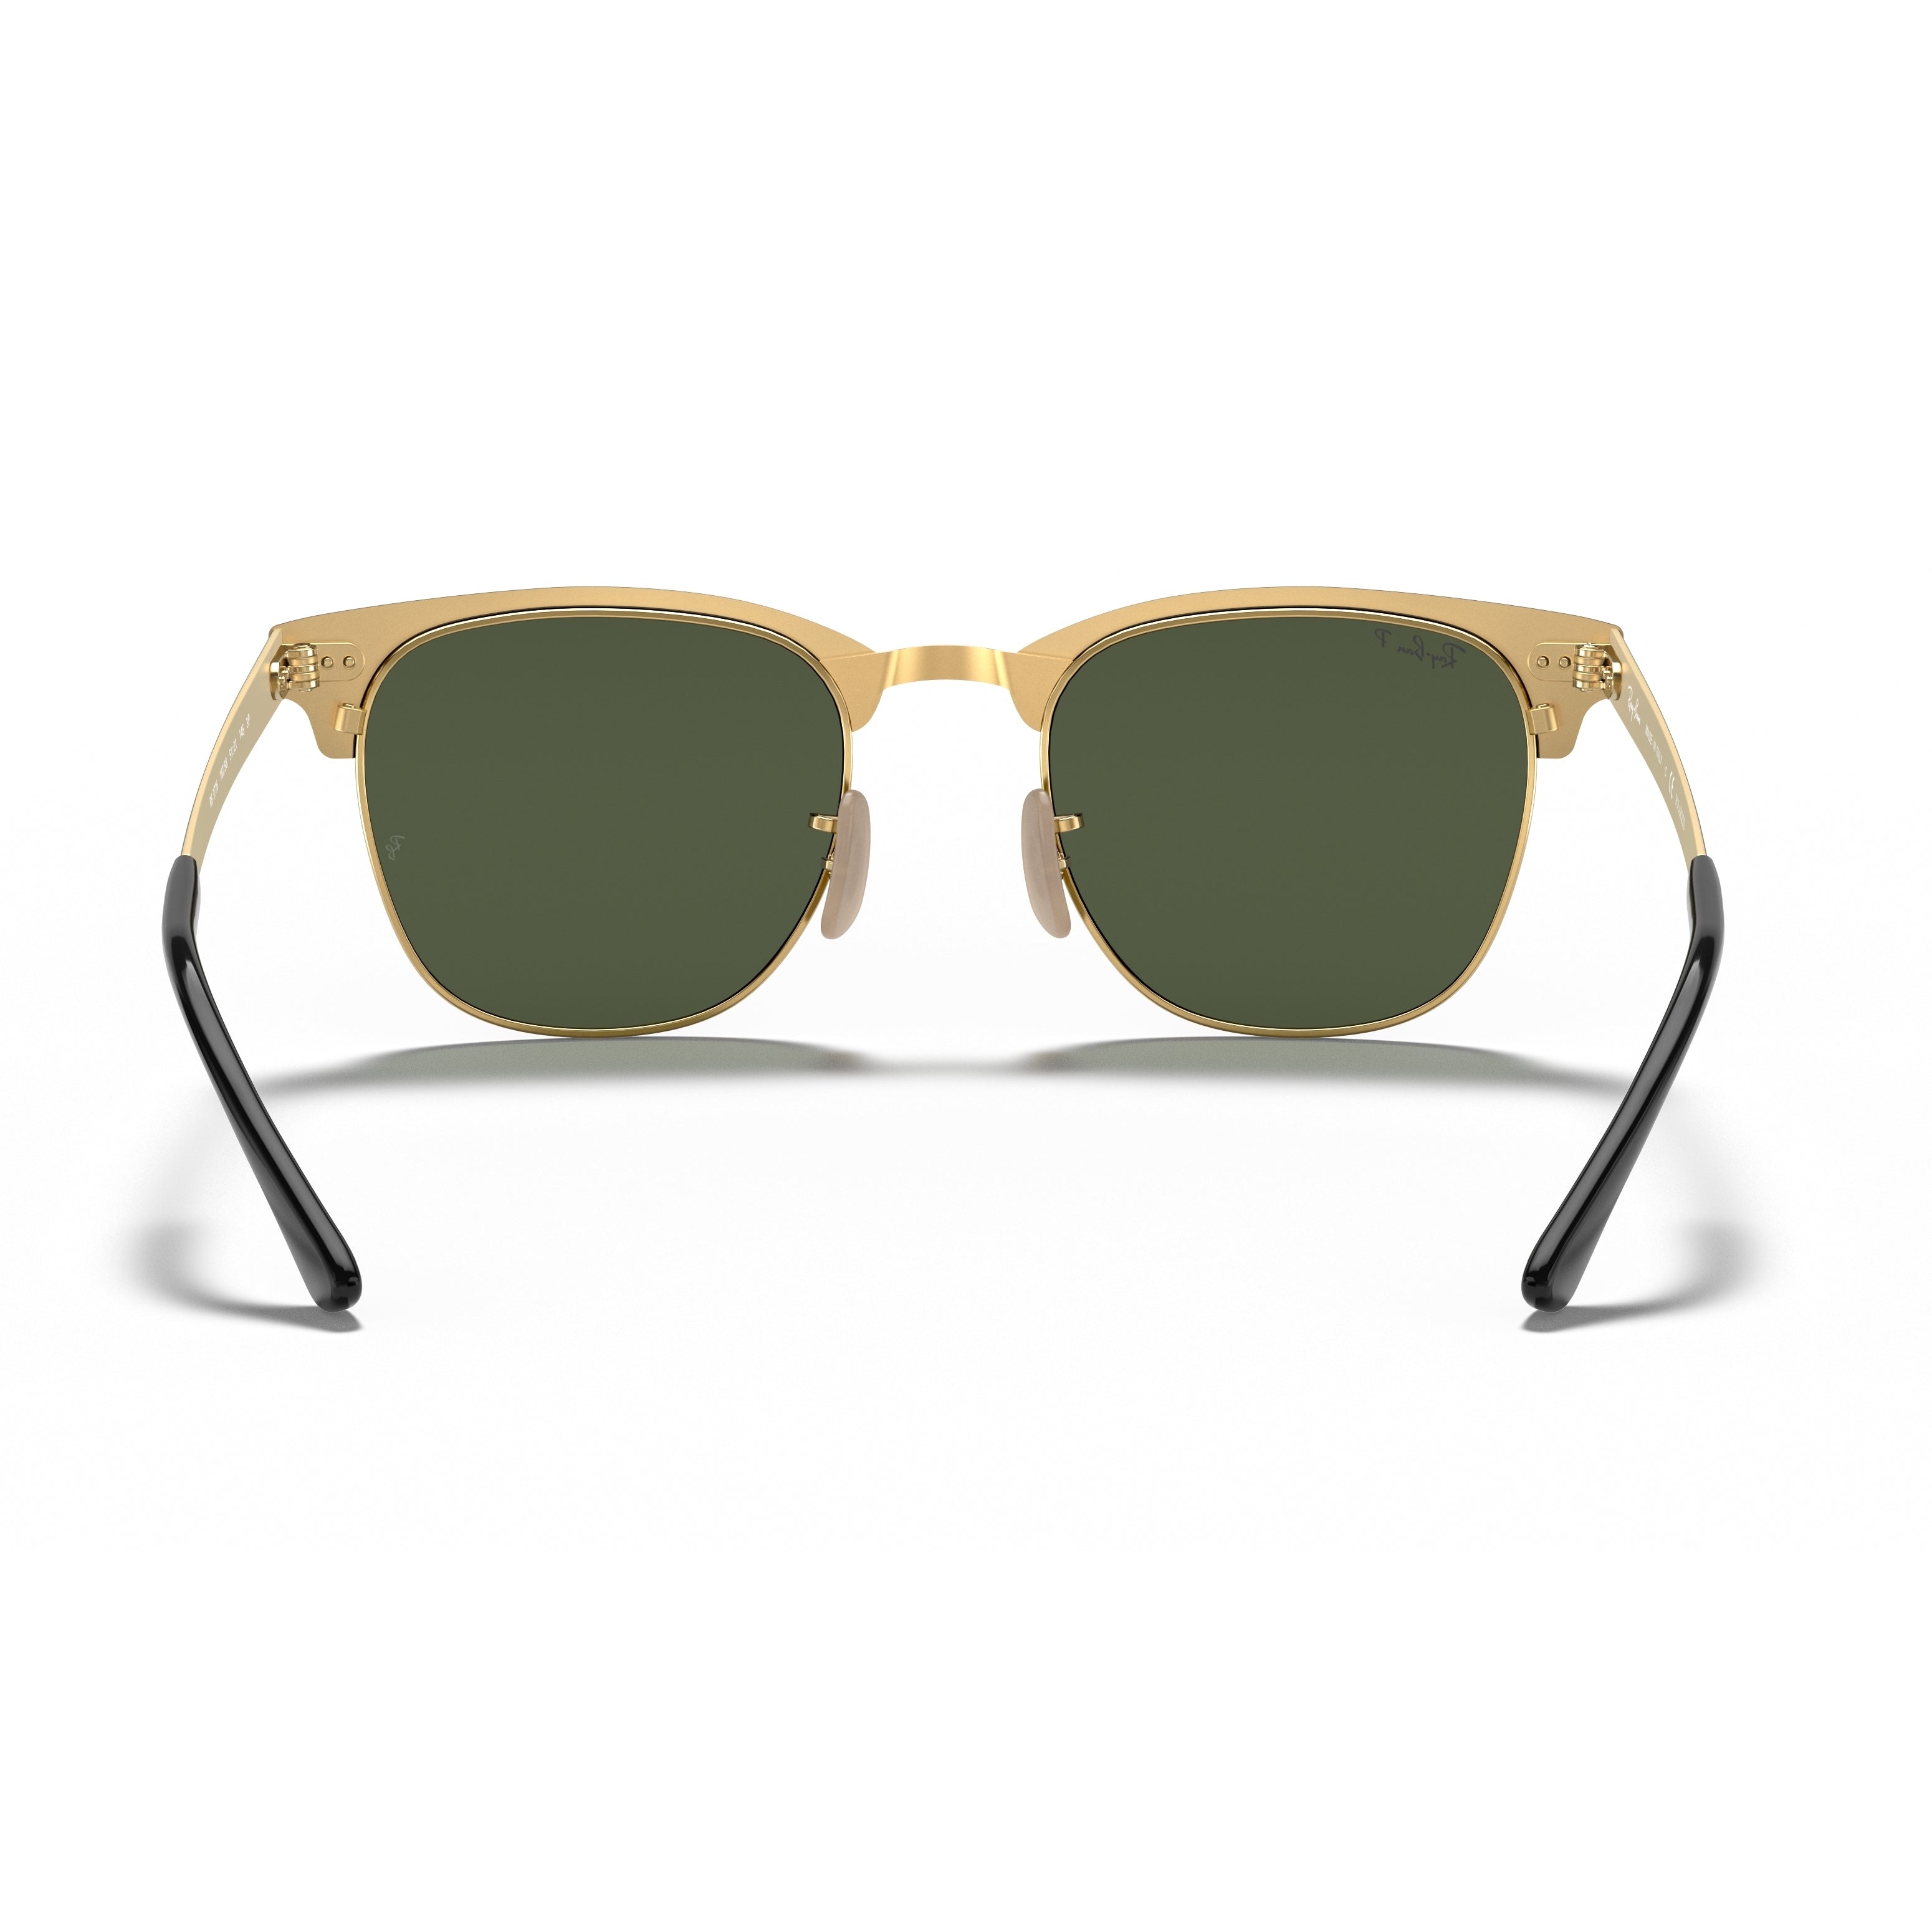 Ray-Ban Ray-Ban Clubmaster Metal Green Classic G-15 Square Unisex Sunglasses RB3716 187/58 51